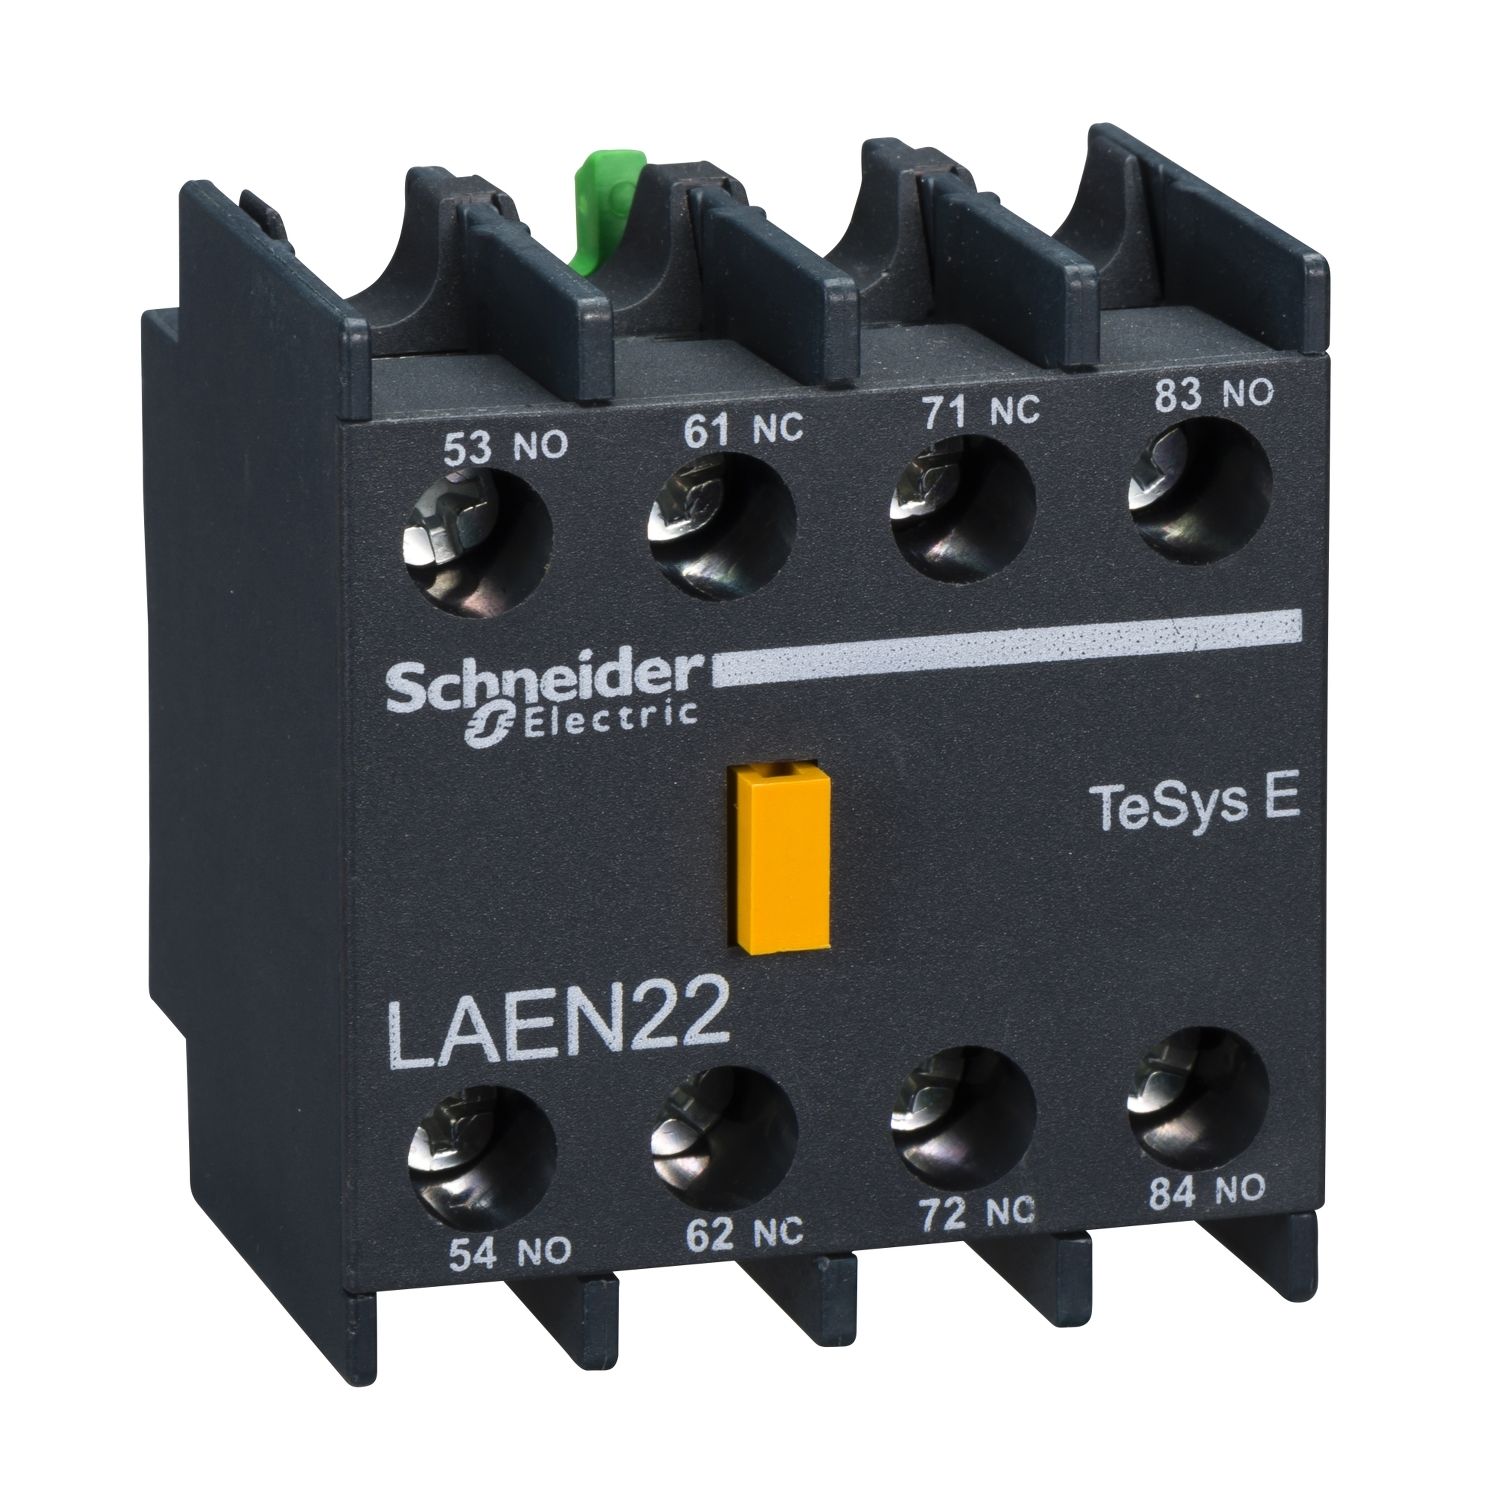 LAEN22 EasyPact TVS - auxiliary contact block - 2 NO + 2 NC - screw-clamps terminals